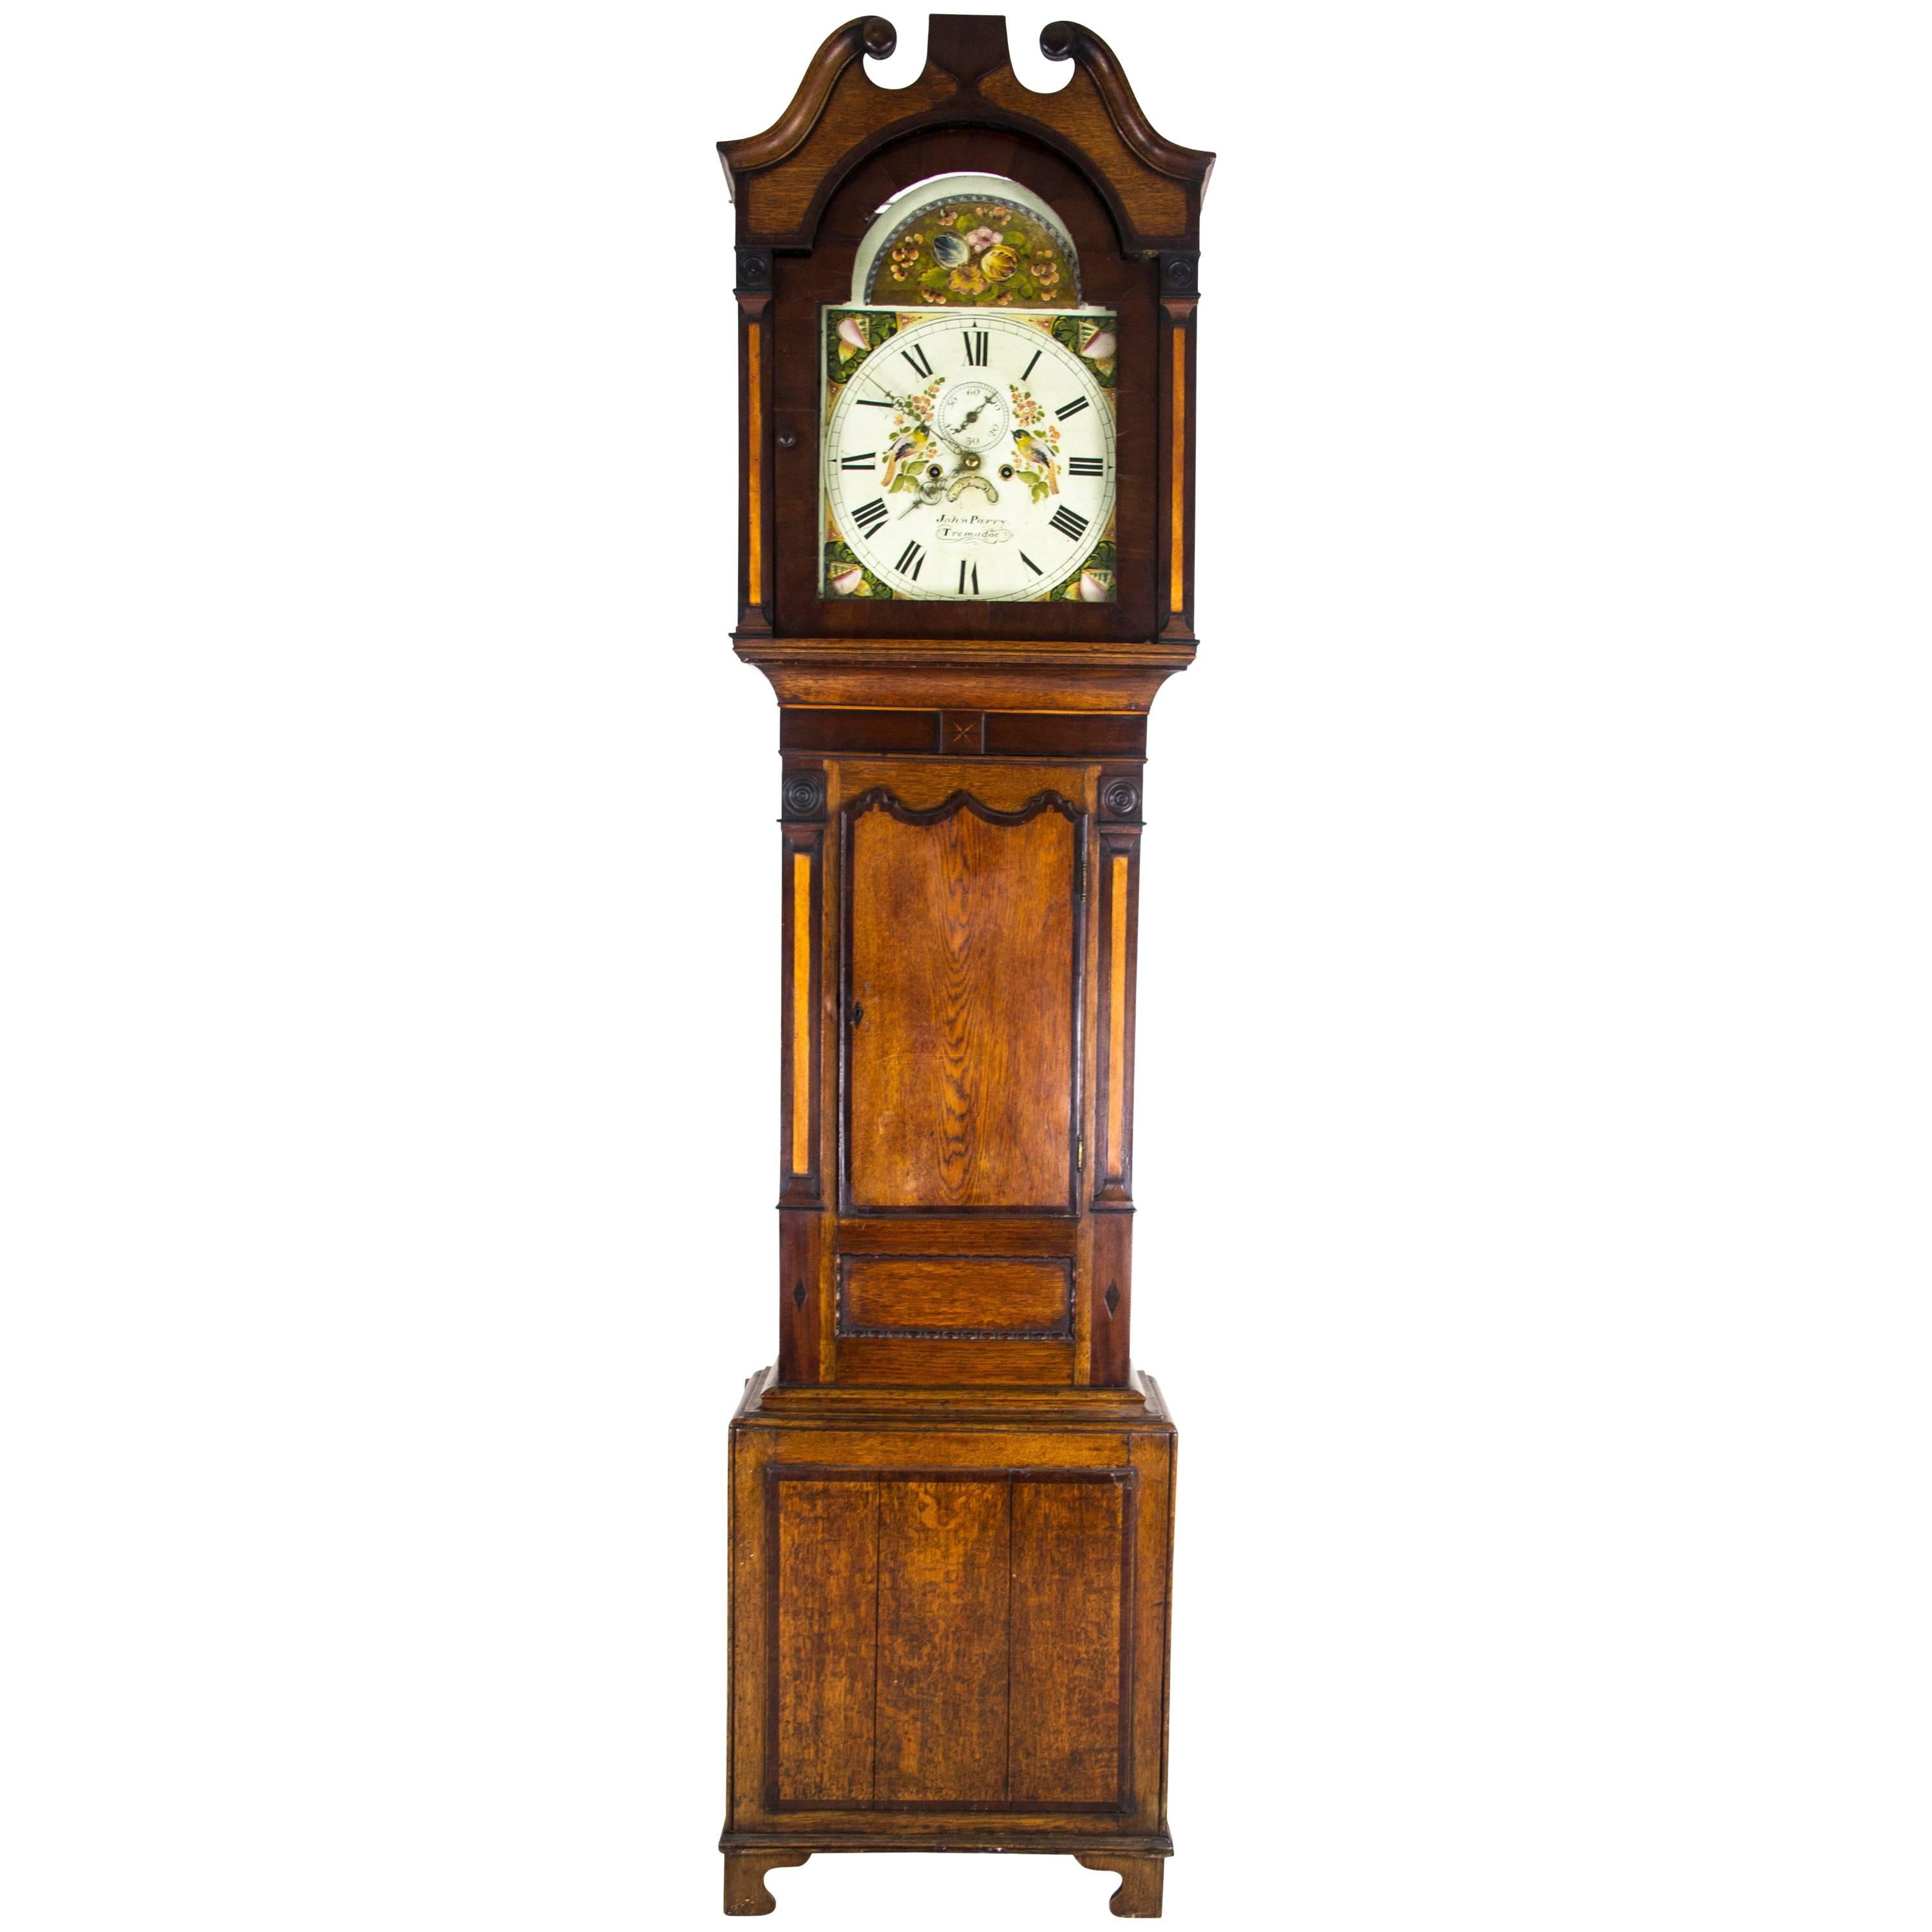 Antique Long Case Clock, Grandfather Clock, 8 Day Movement, Wales, 1820, B725